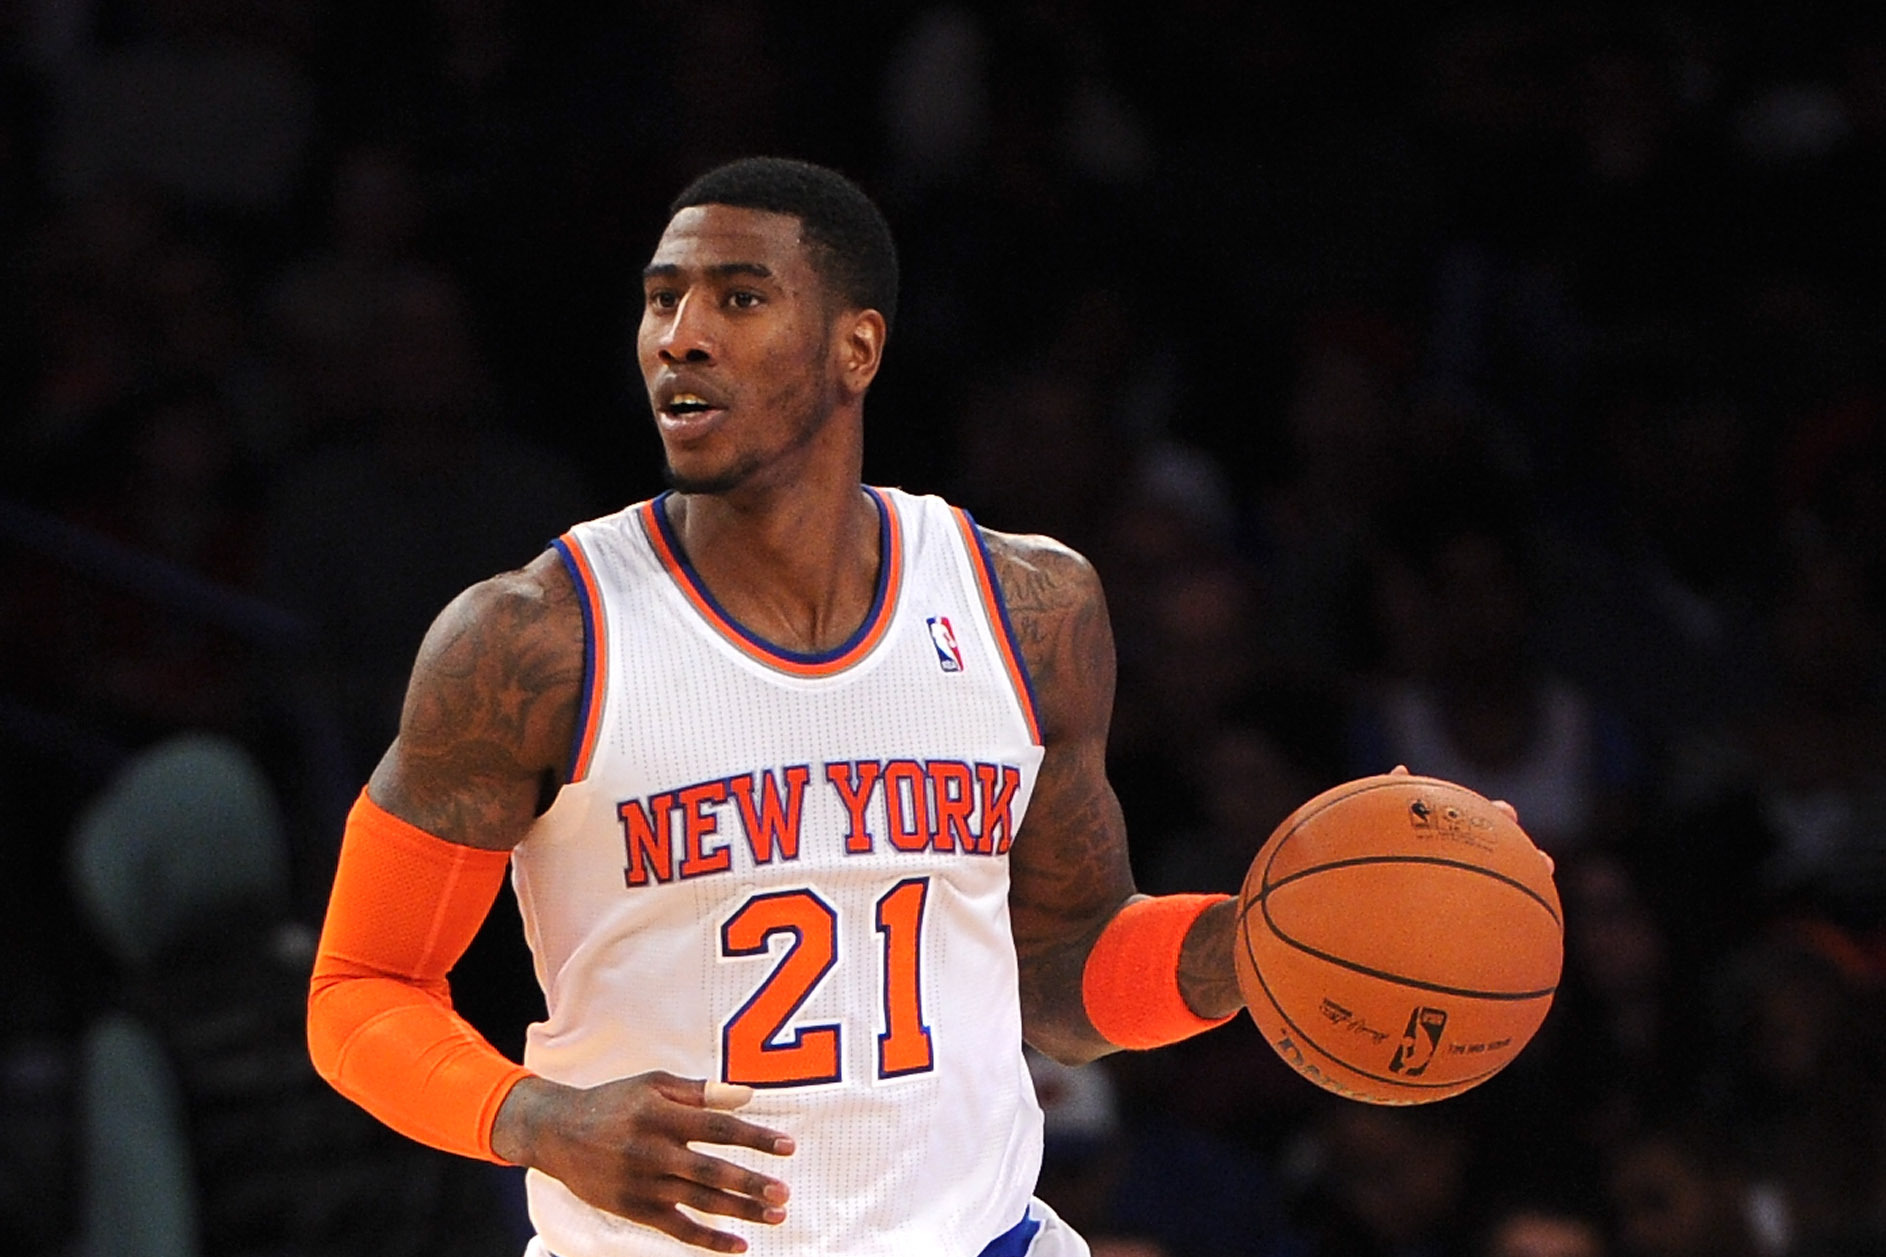 Why Are New York Knicks so Desperate to Trade Iman Shumpert